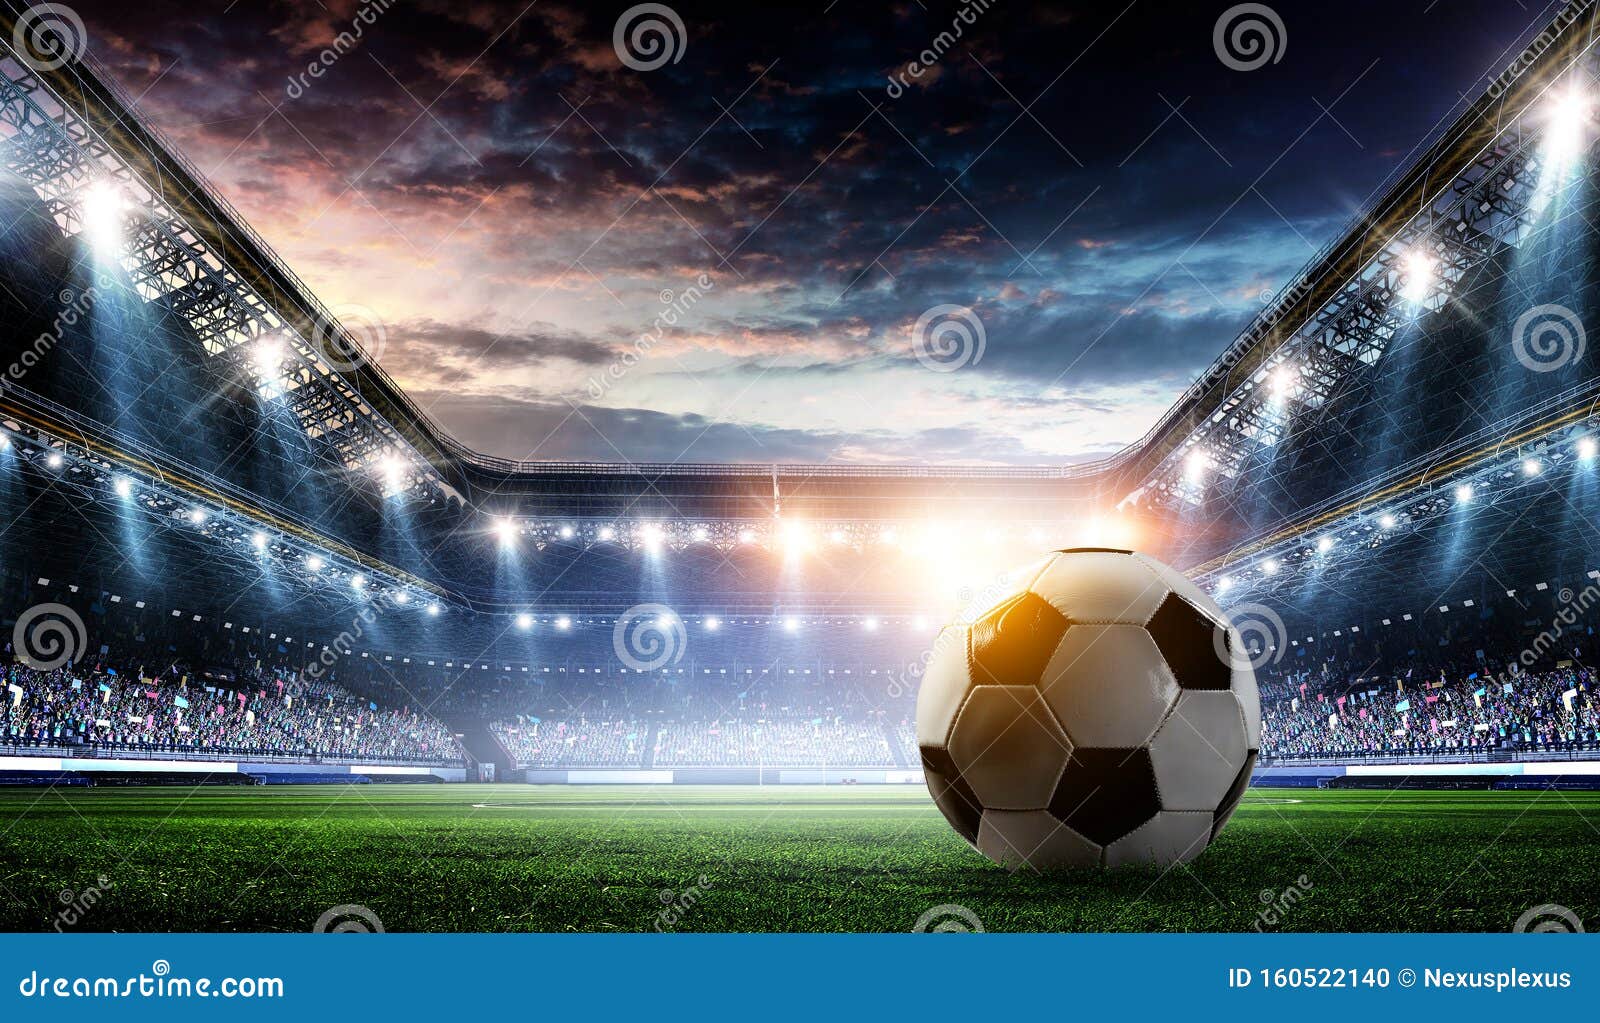 Full Night Football Arena in Lights Stock Photo - Image of leisure ...